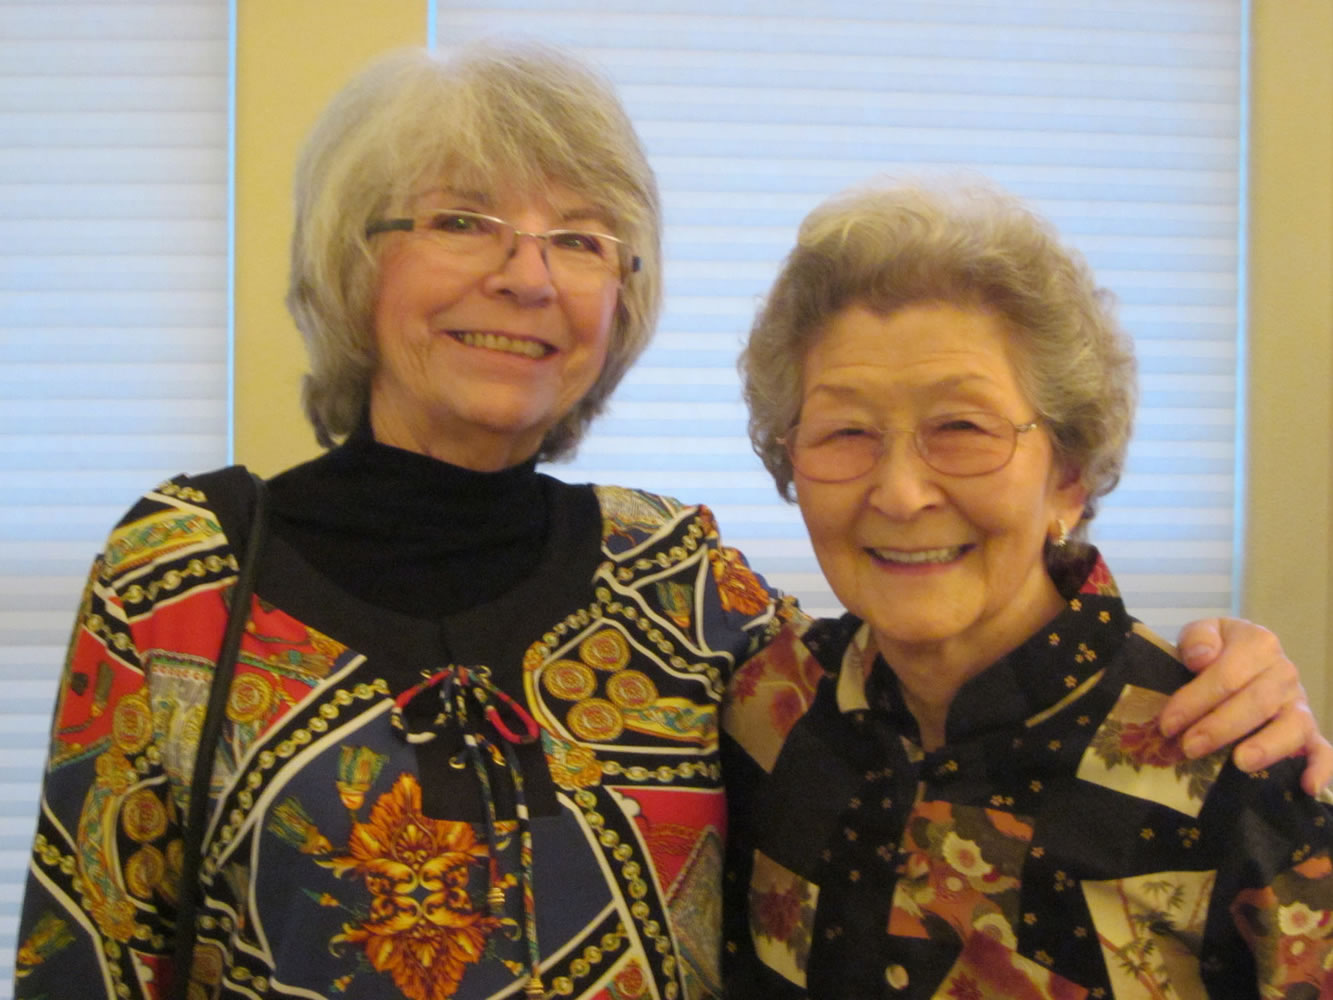 Photos courtesy of Frances &quot;Chickie&quot; Ishihara White
Old friends Nancy Guenther, 76, left, and Frances &quot;Chickie&quot; White, 86, were reunited last summer after The Columbian published a story about Chickie starting her singing career in an internment camp during World War II.